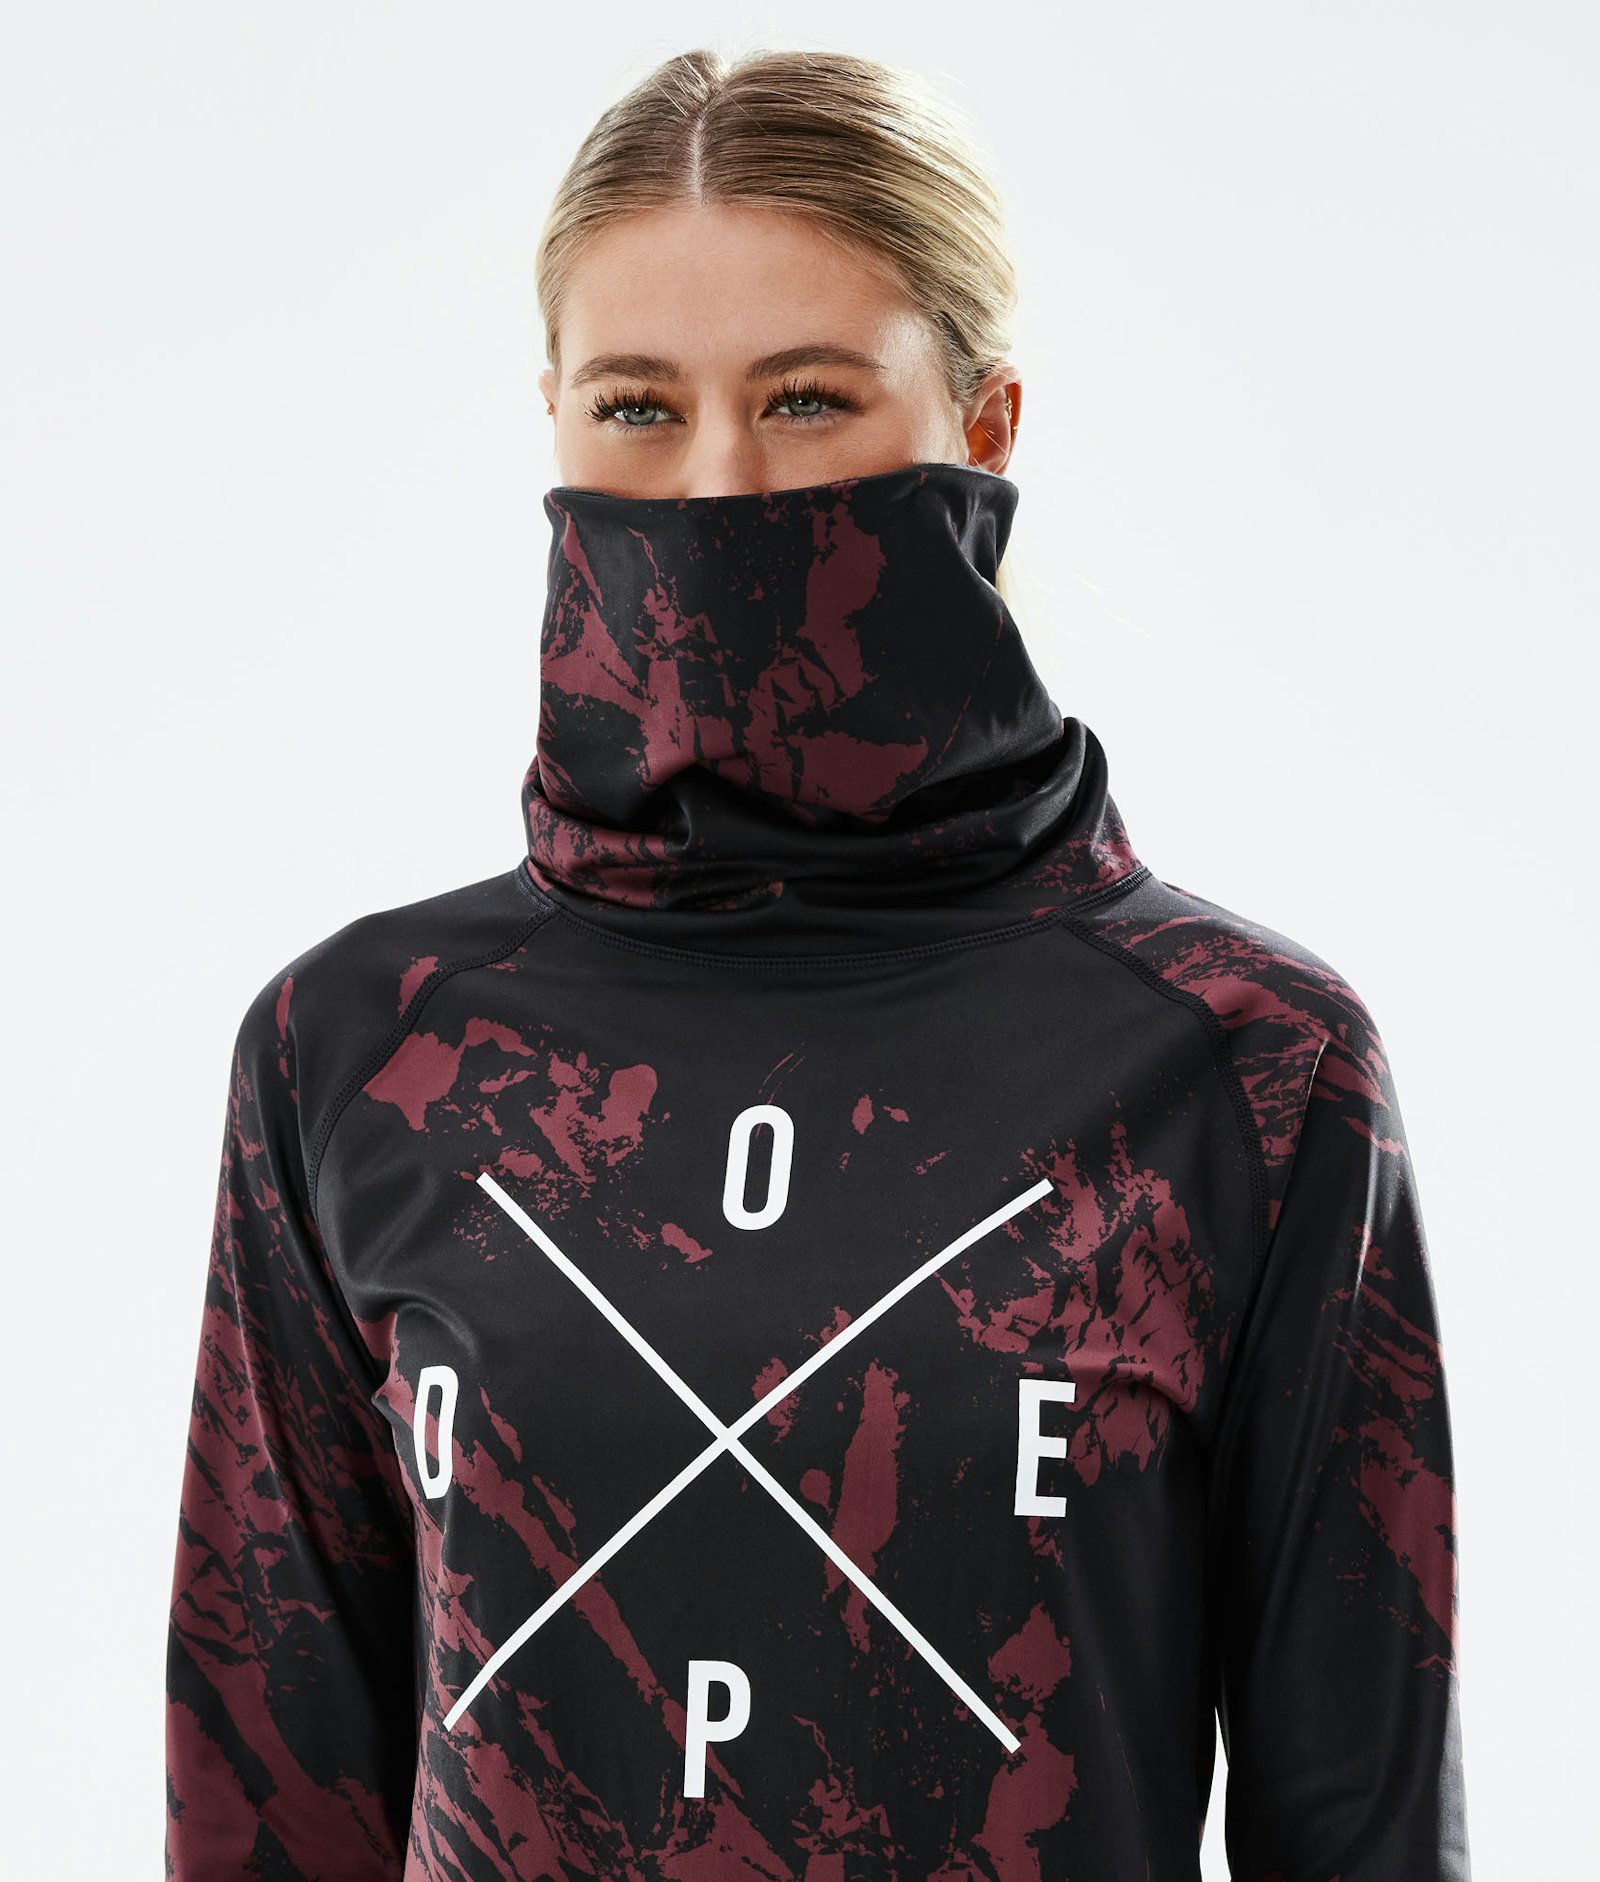 Dope Snuggle W Base Layer Top Women 2X-Up Paint Burgundy